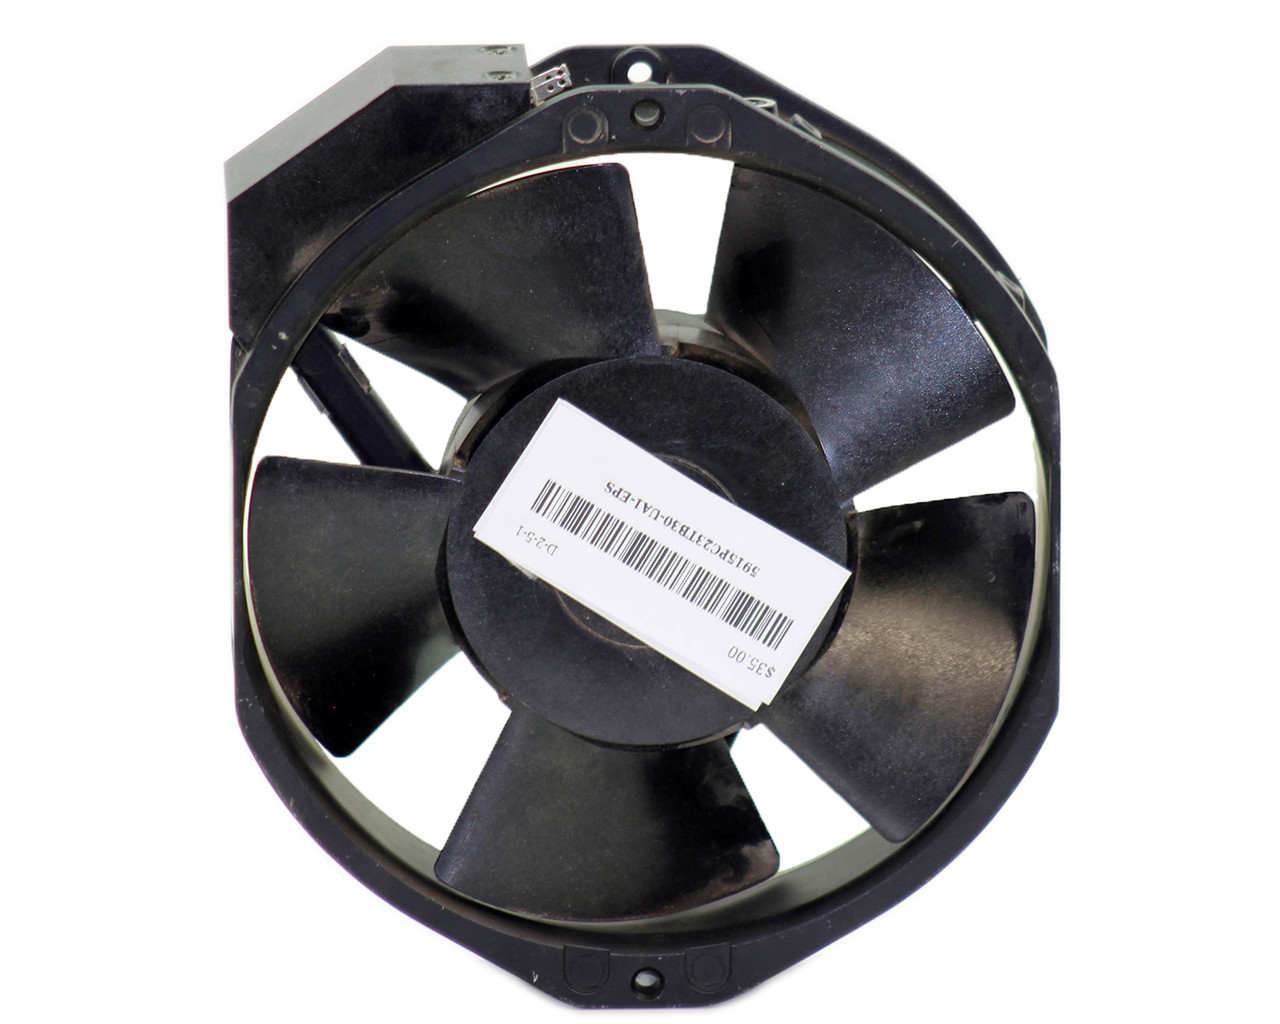 NMB 5915PC-23T-B30 Thermally Protected Cooling Fan 230V AC 50/60Hz 35/35W 1 Ph